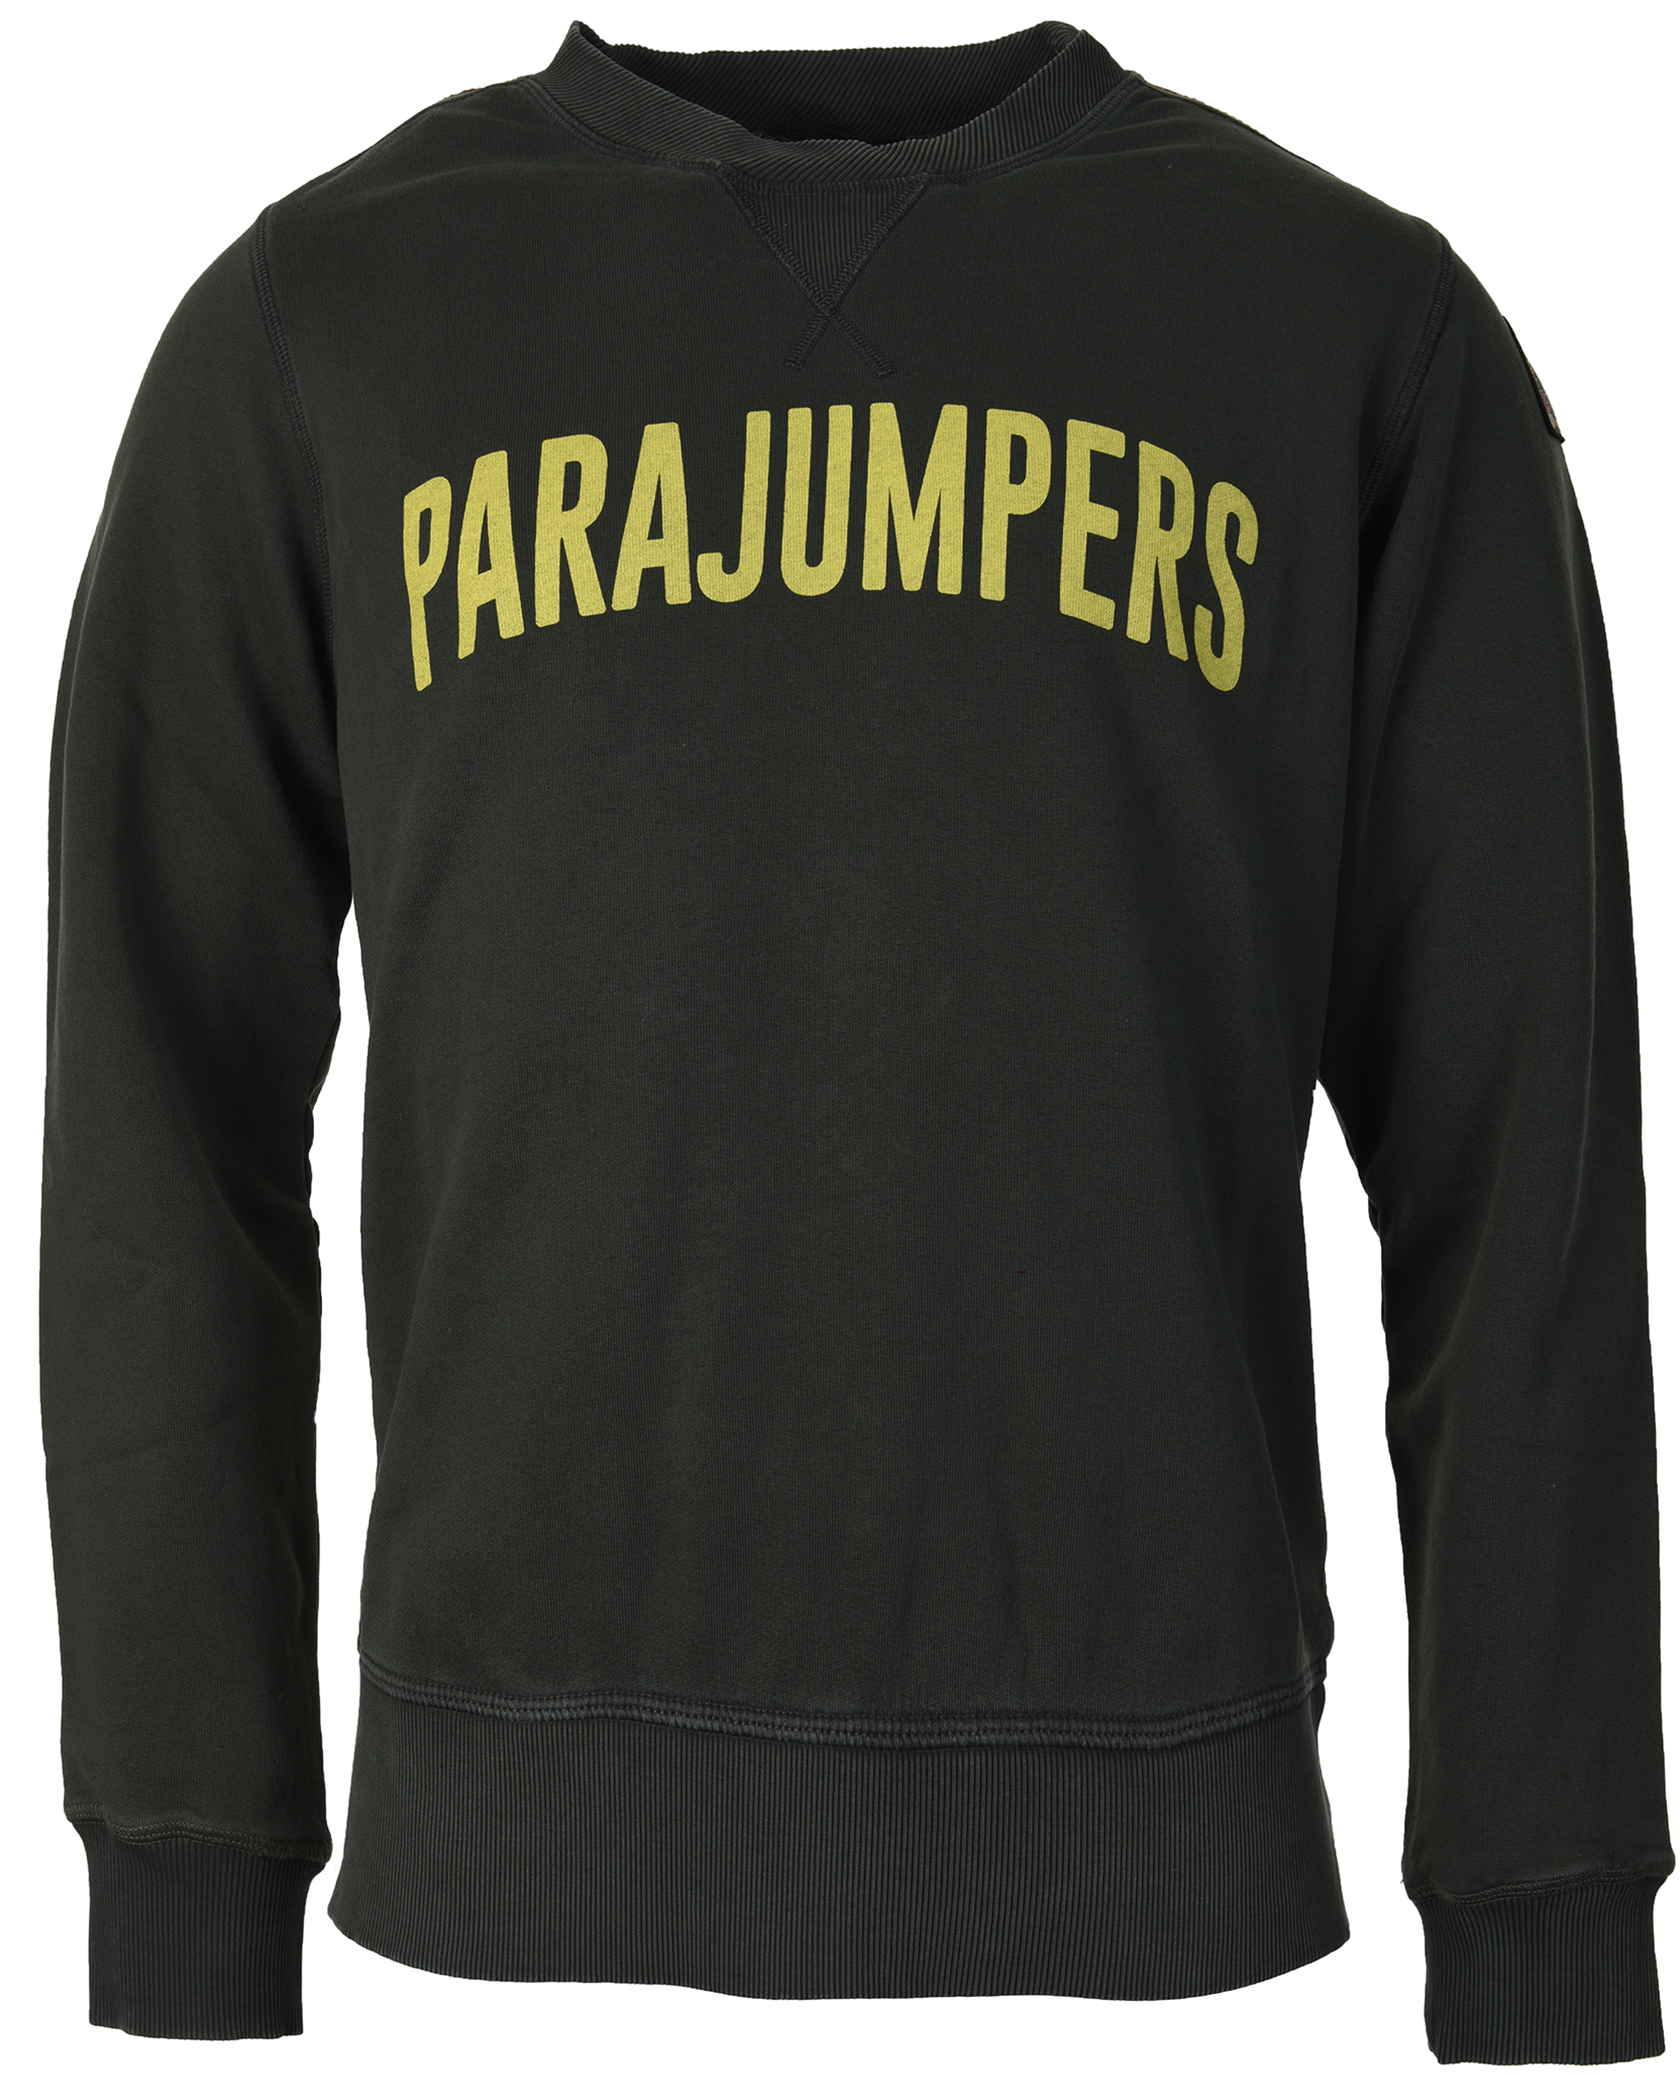 parajumpers sweater